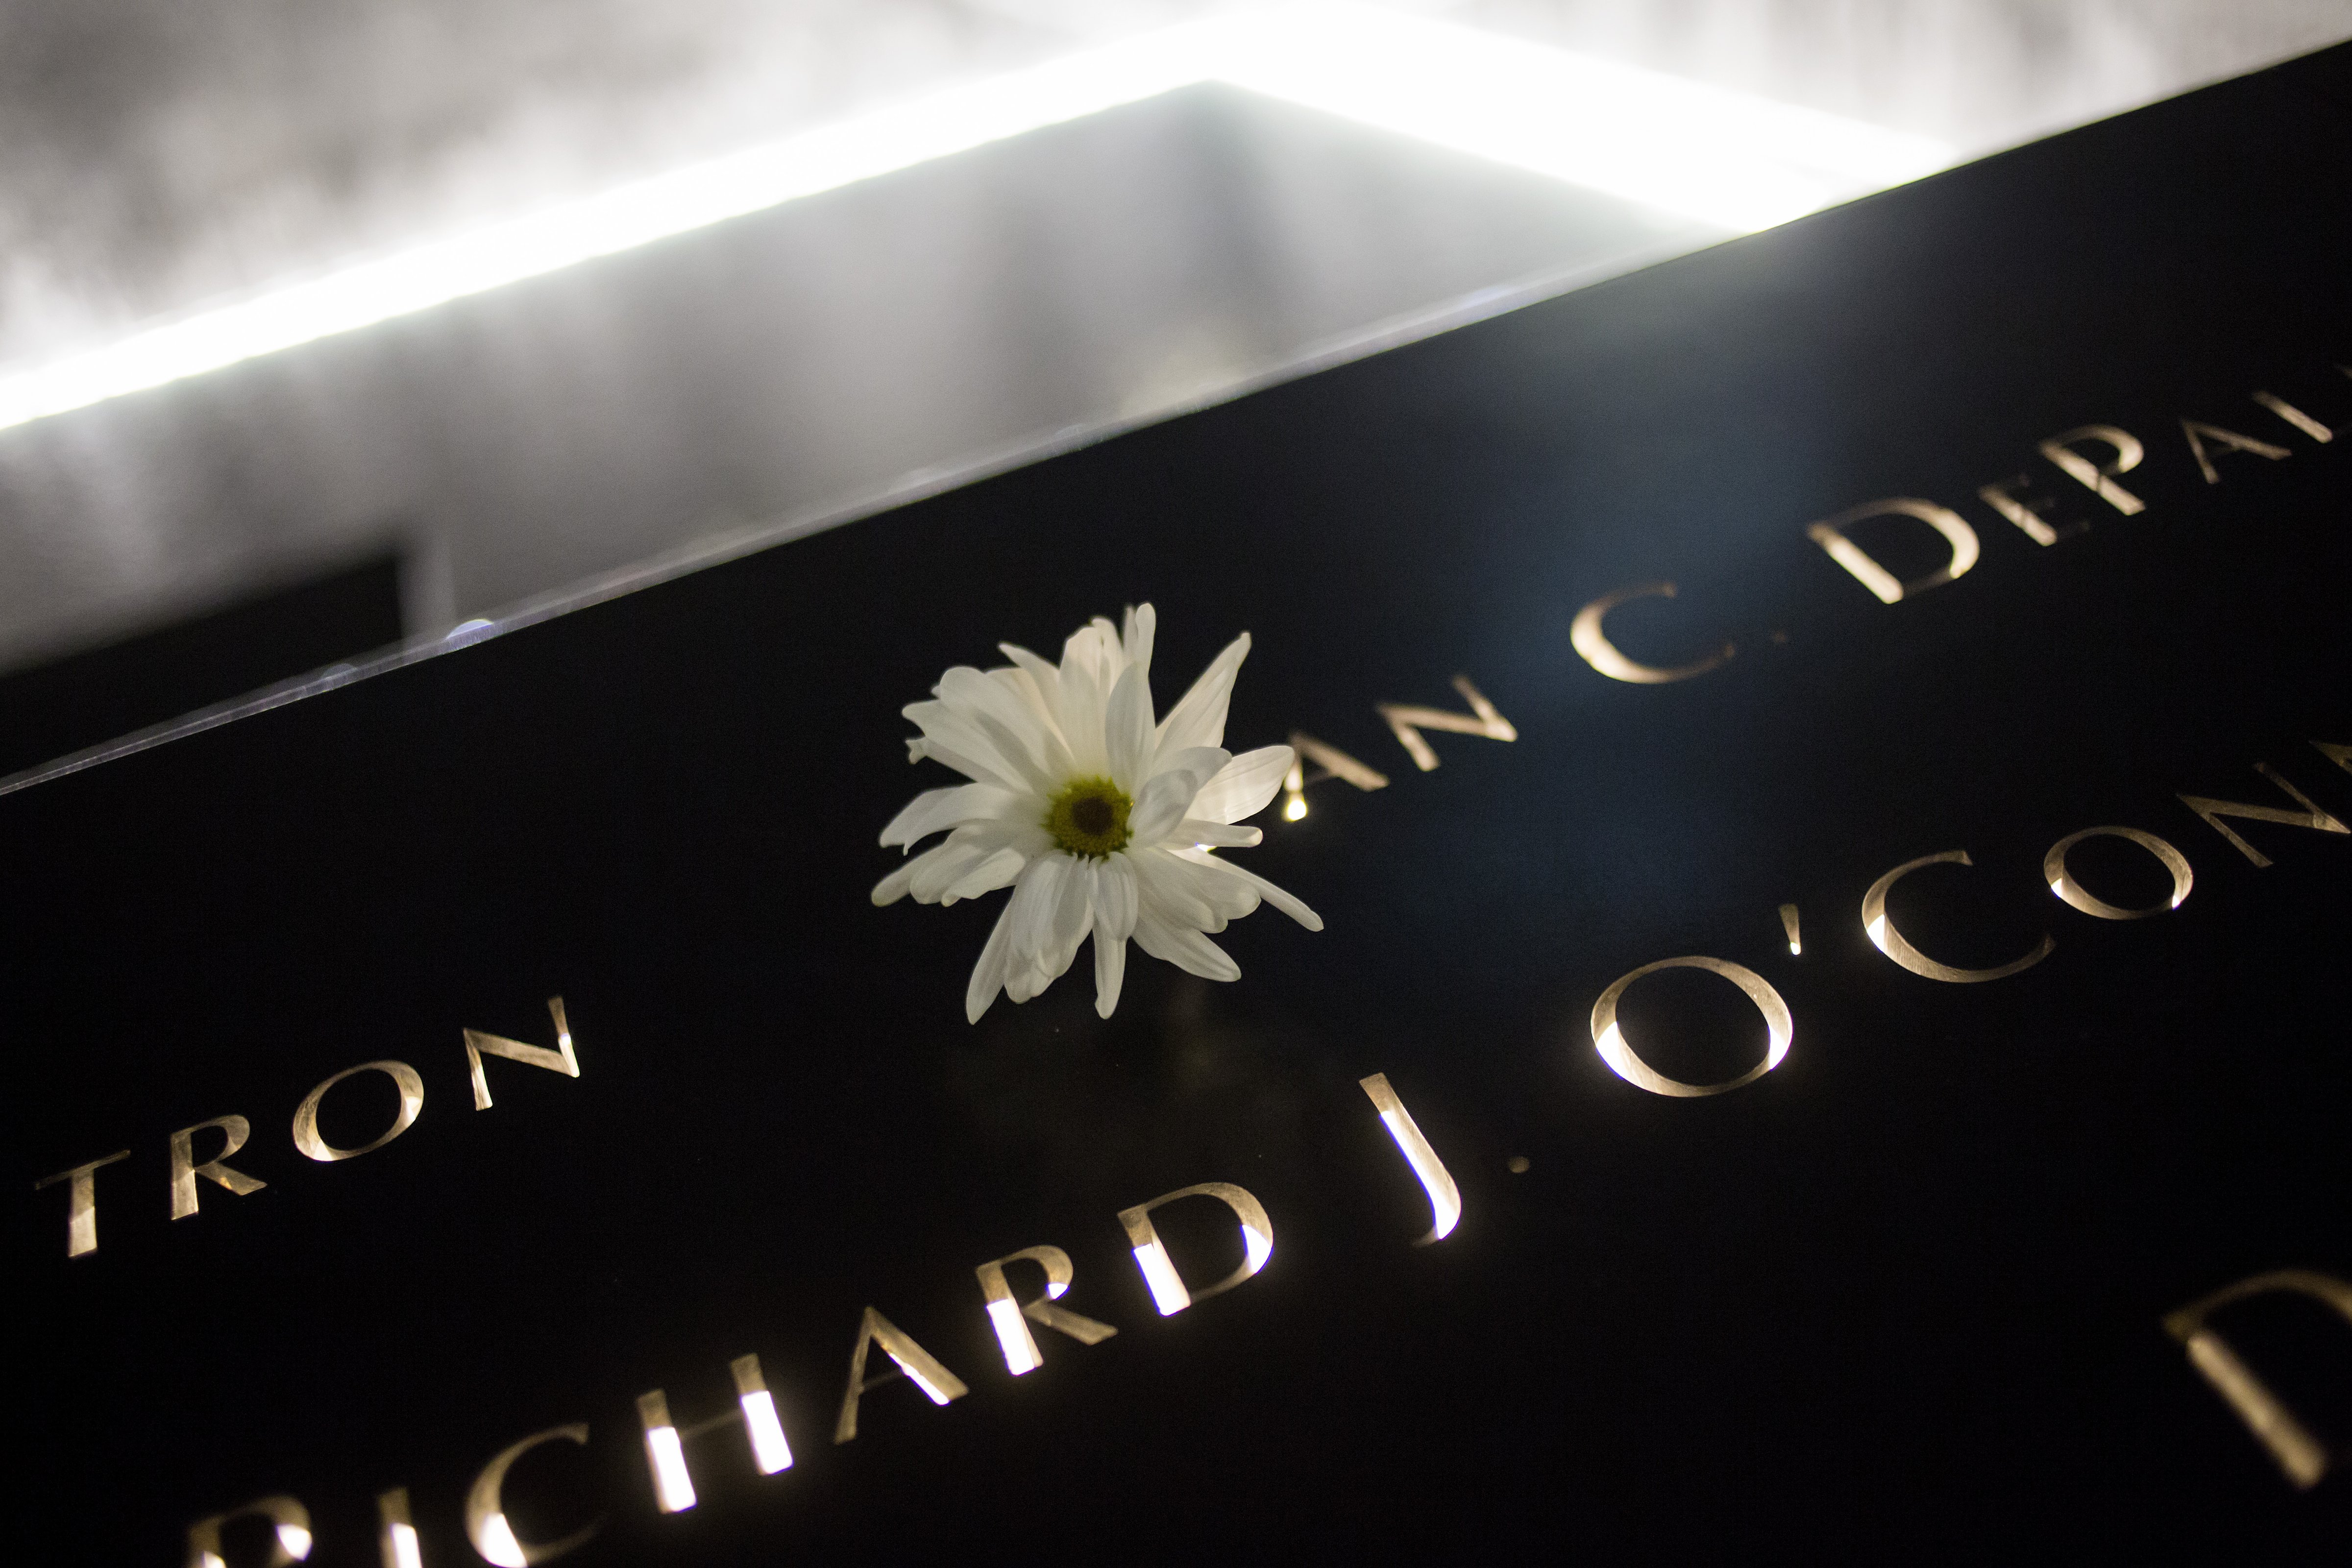 A flower is left at the 9/11 Memorial September 11, 2014 in New York City. This year marks the 13th anniversary of the September 11th terrorist attacks that killed nearly 3,000 people at the World Trade Center, Pentagon and on Flight 93. (Eric Thayer&mdash;Getty Images)